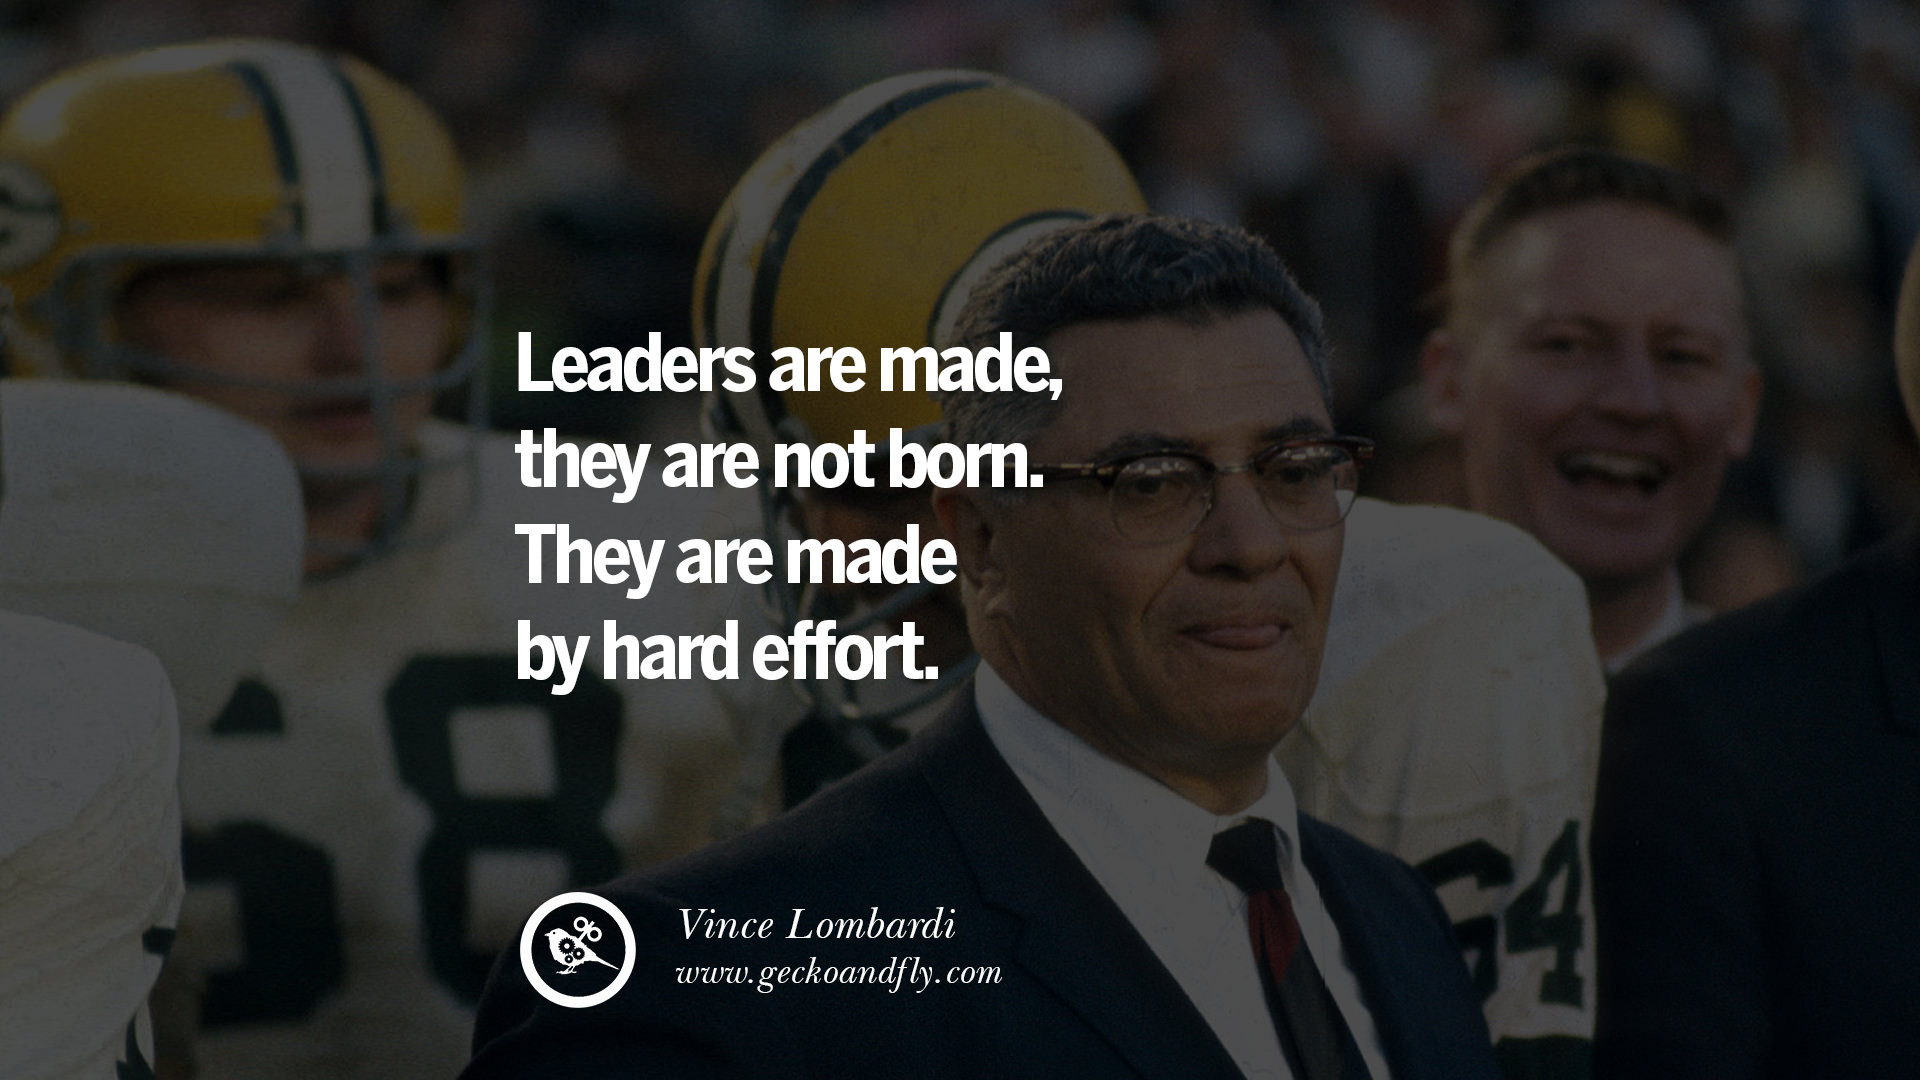 Vince Lombardi Quotes On Leadership
 22 Uplifting and Motivational Quotes on Management Leadership